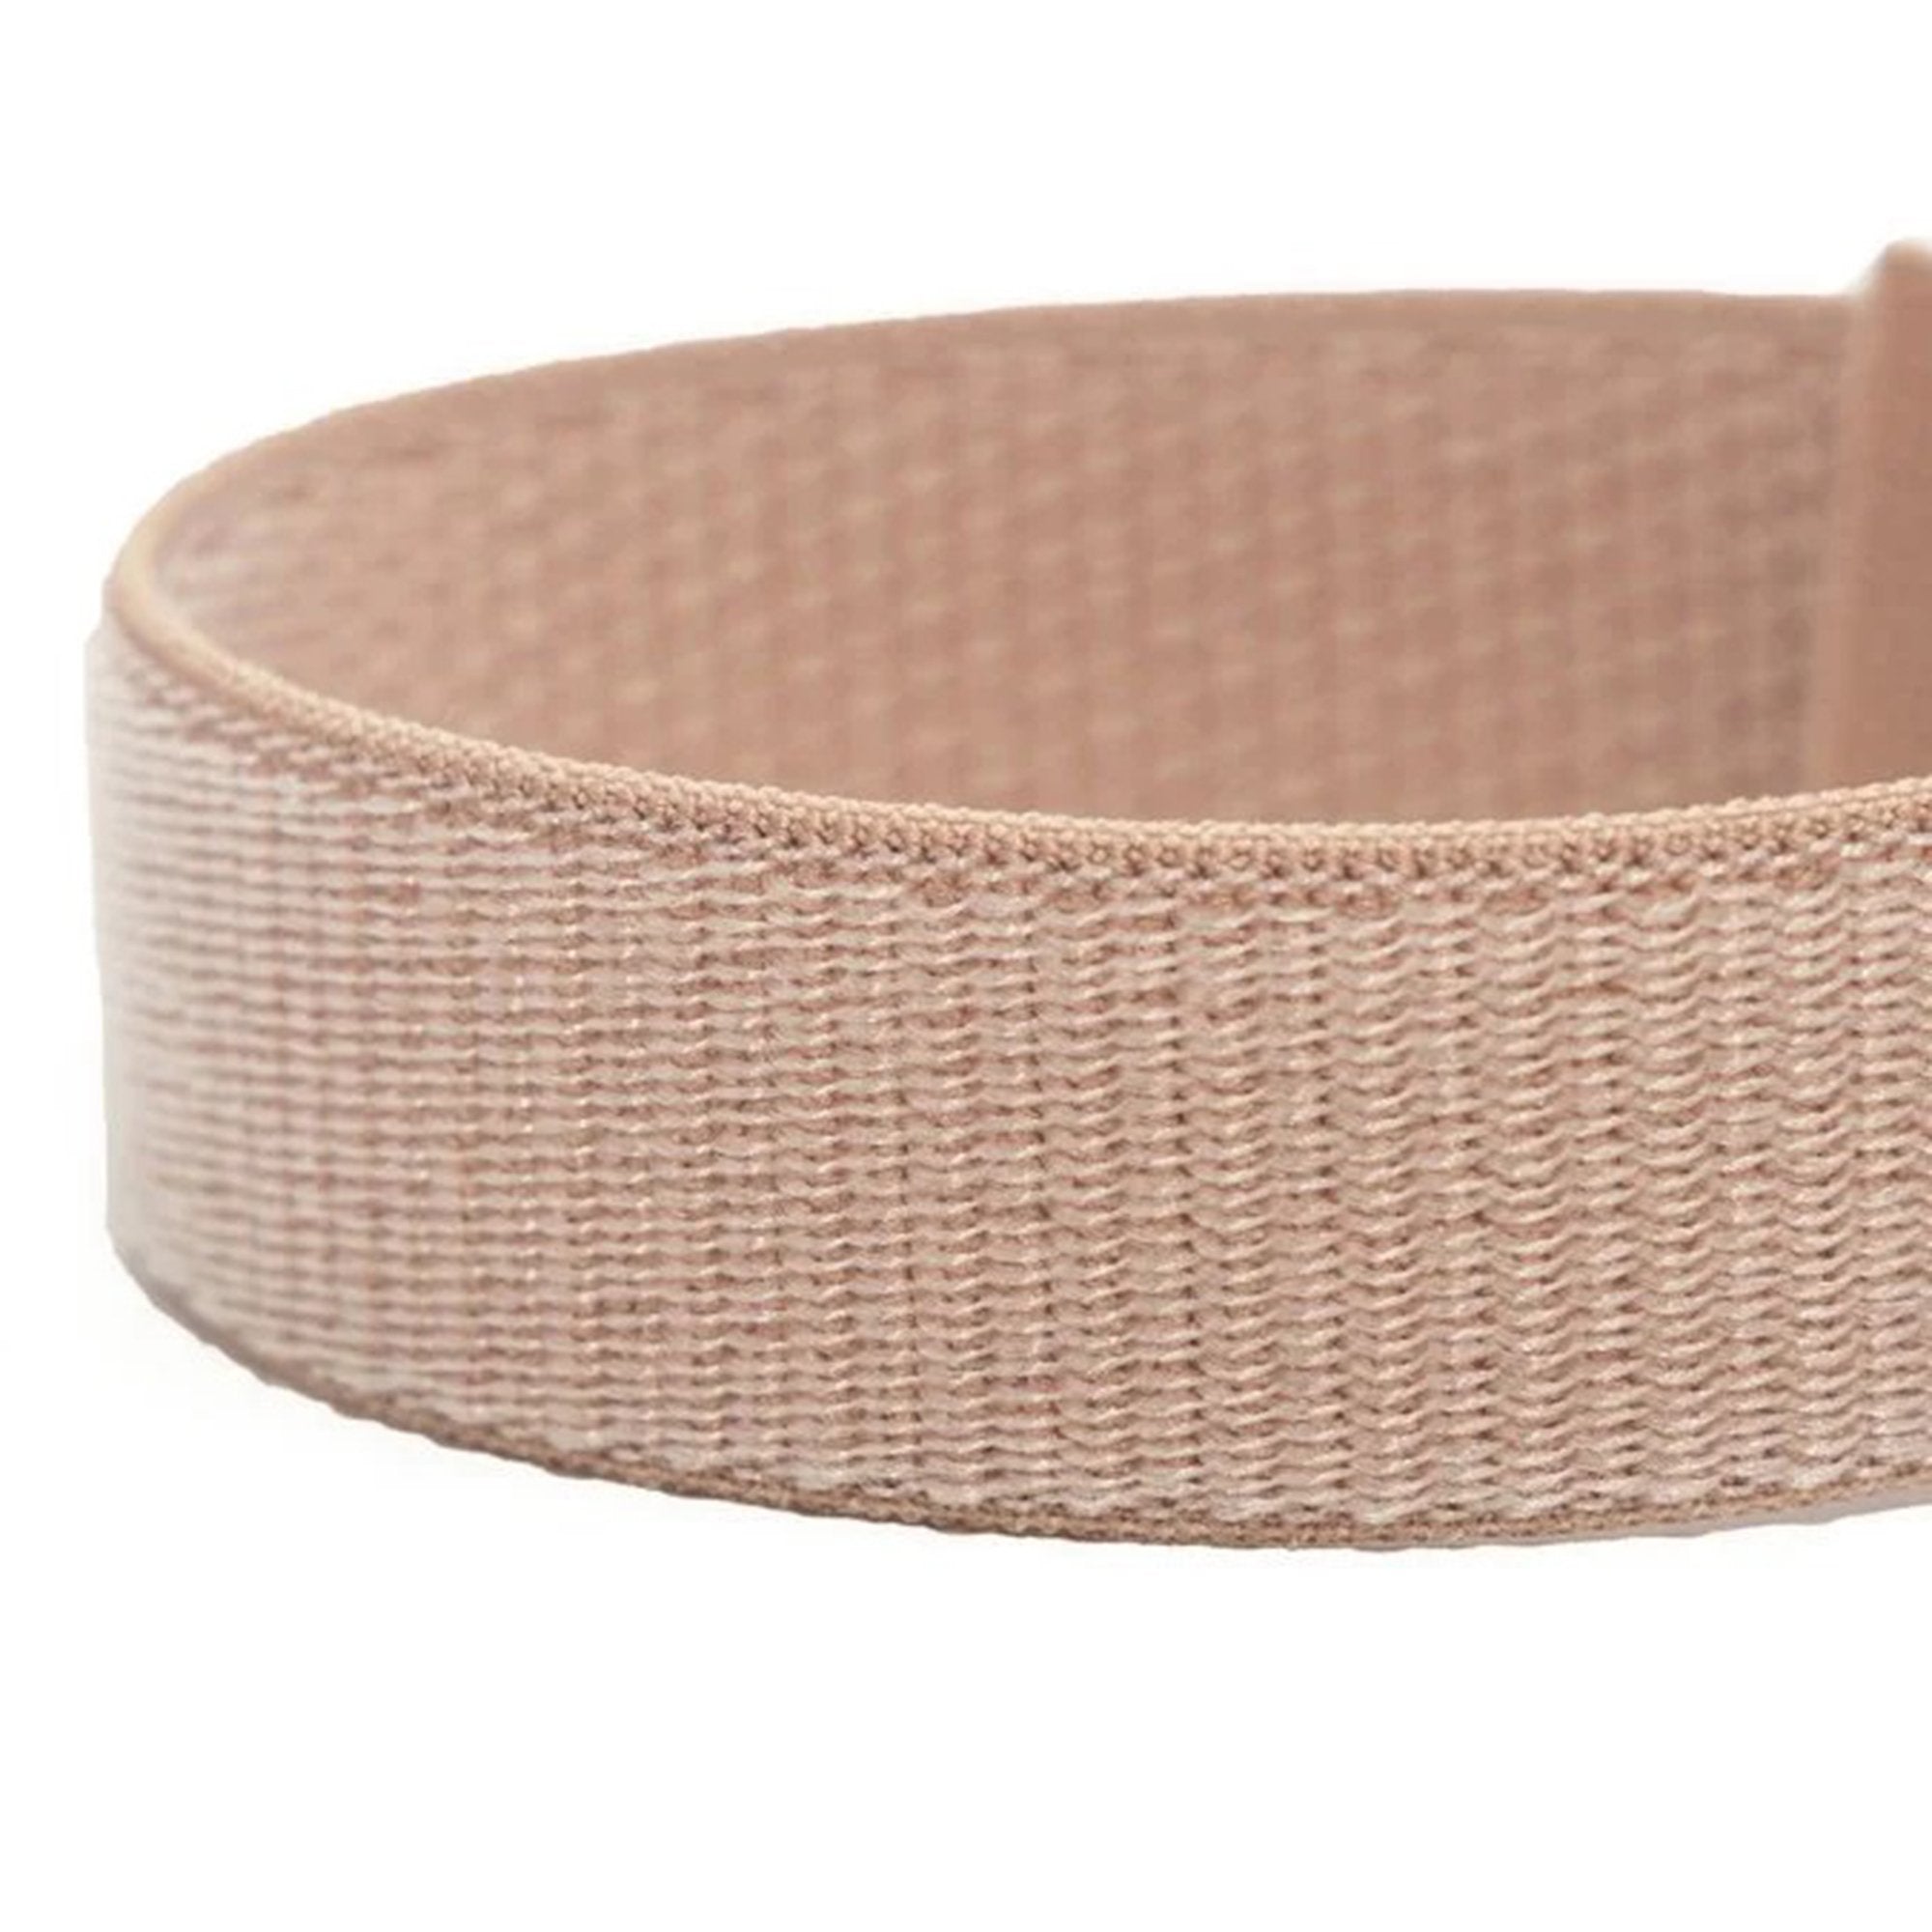 Comfort Band Embr Wave 2 Woven Nylon, Dusty Rose